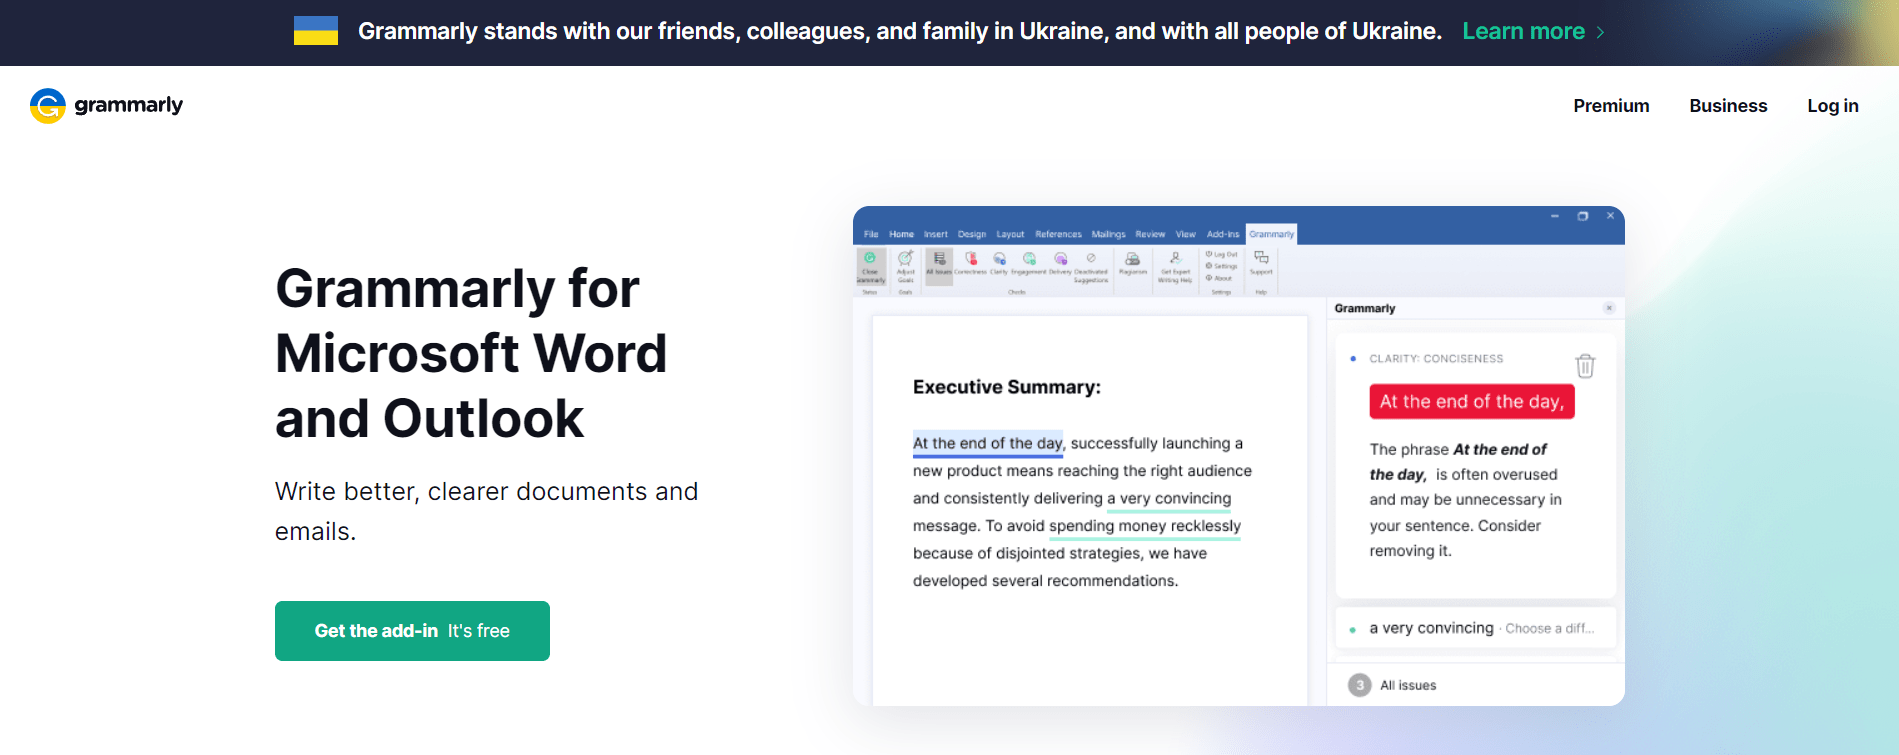 download grammarly for outlook for free